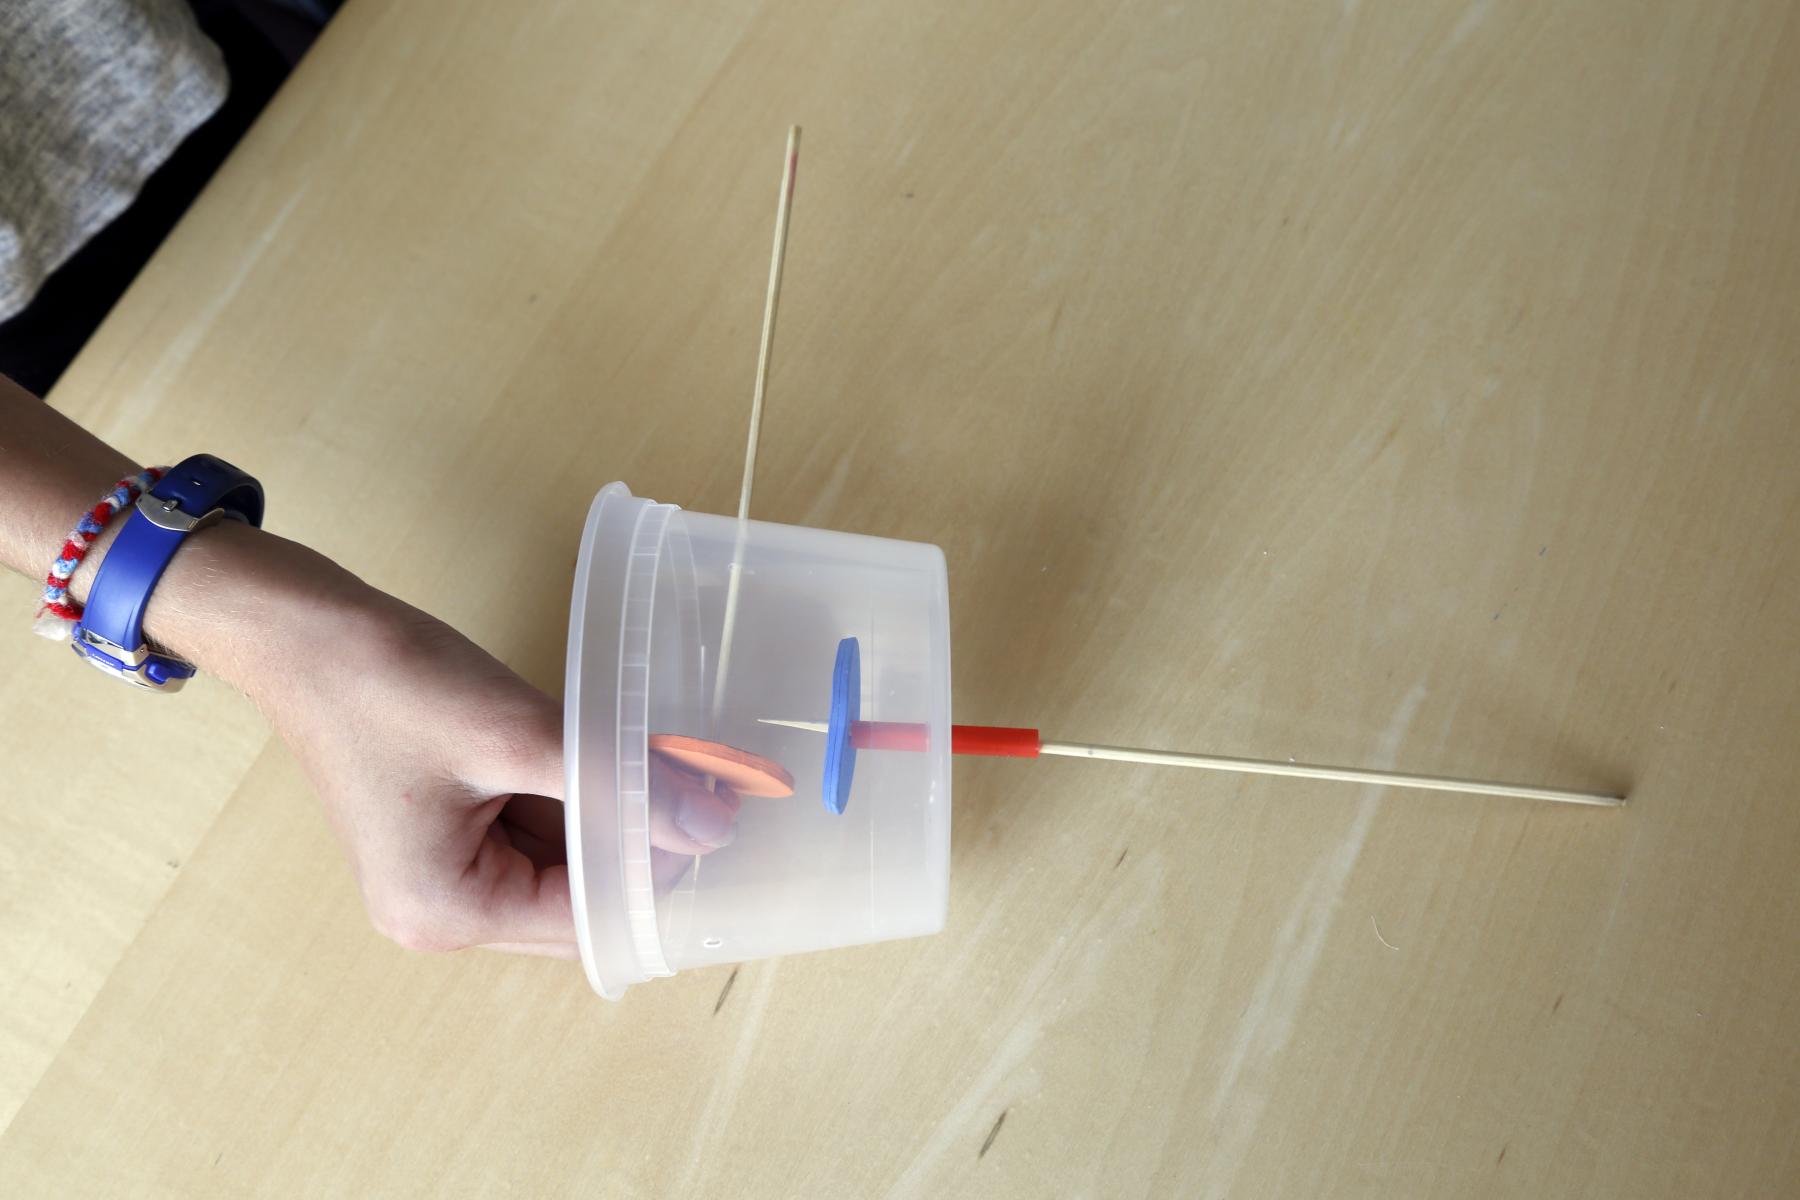 Automata inner mechanics - a hand holding the plastic container with two sticks and two oval foam pieces